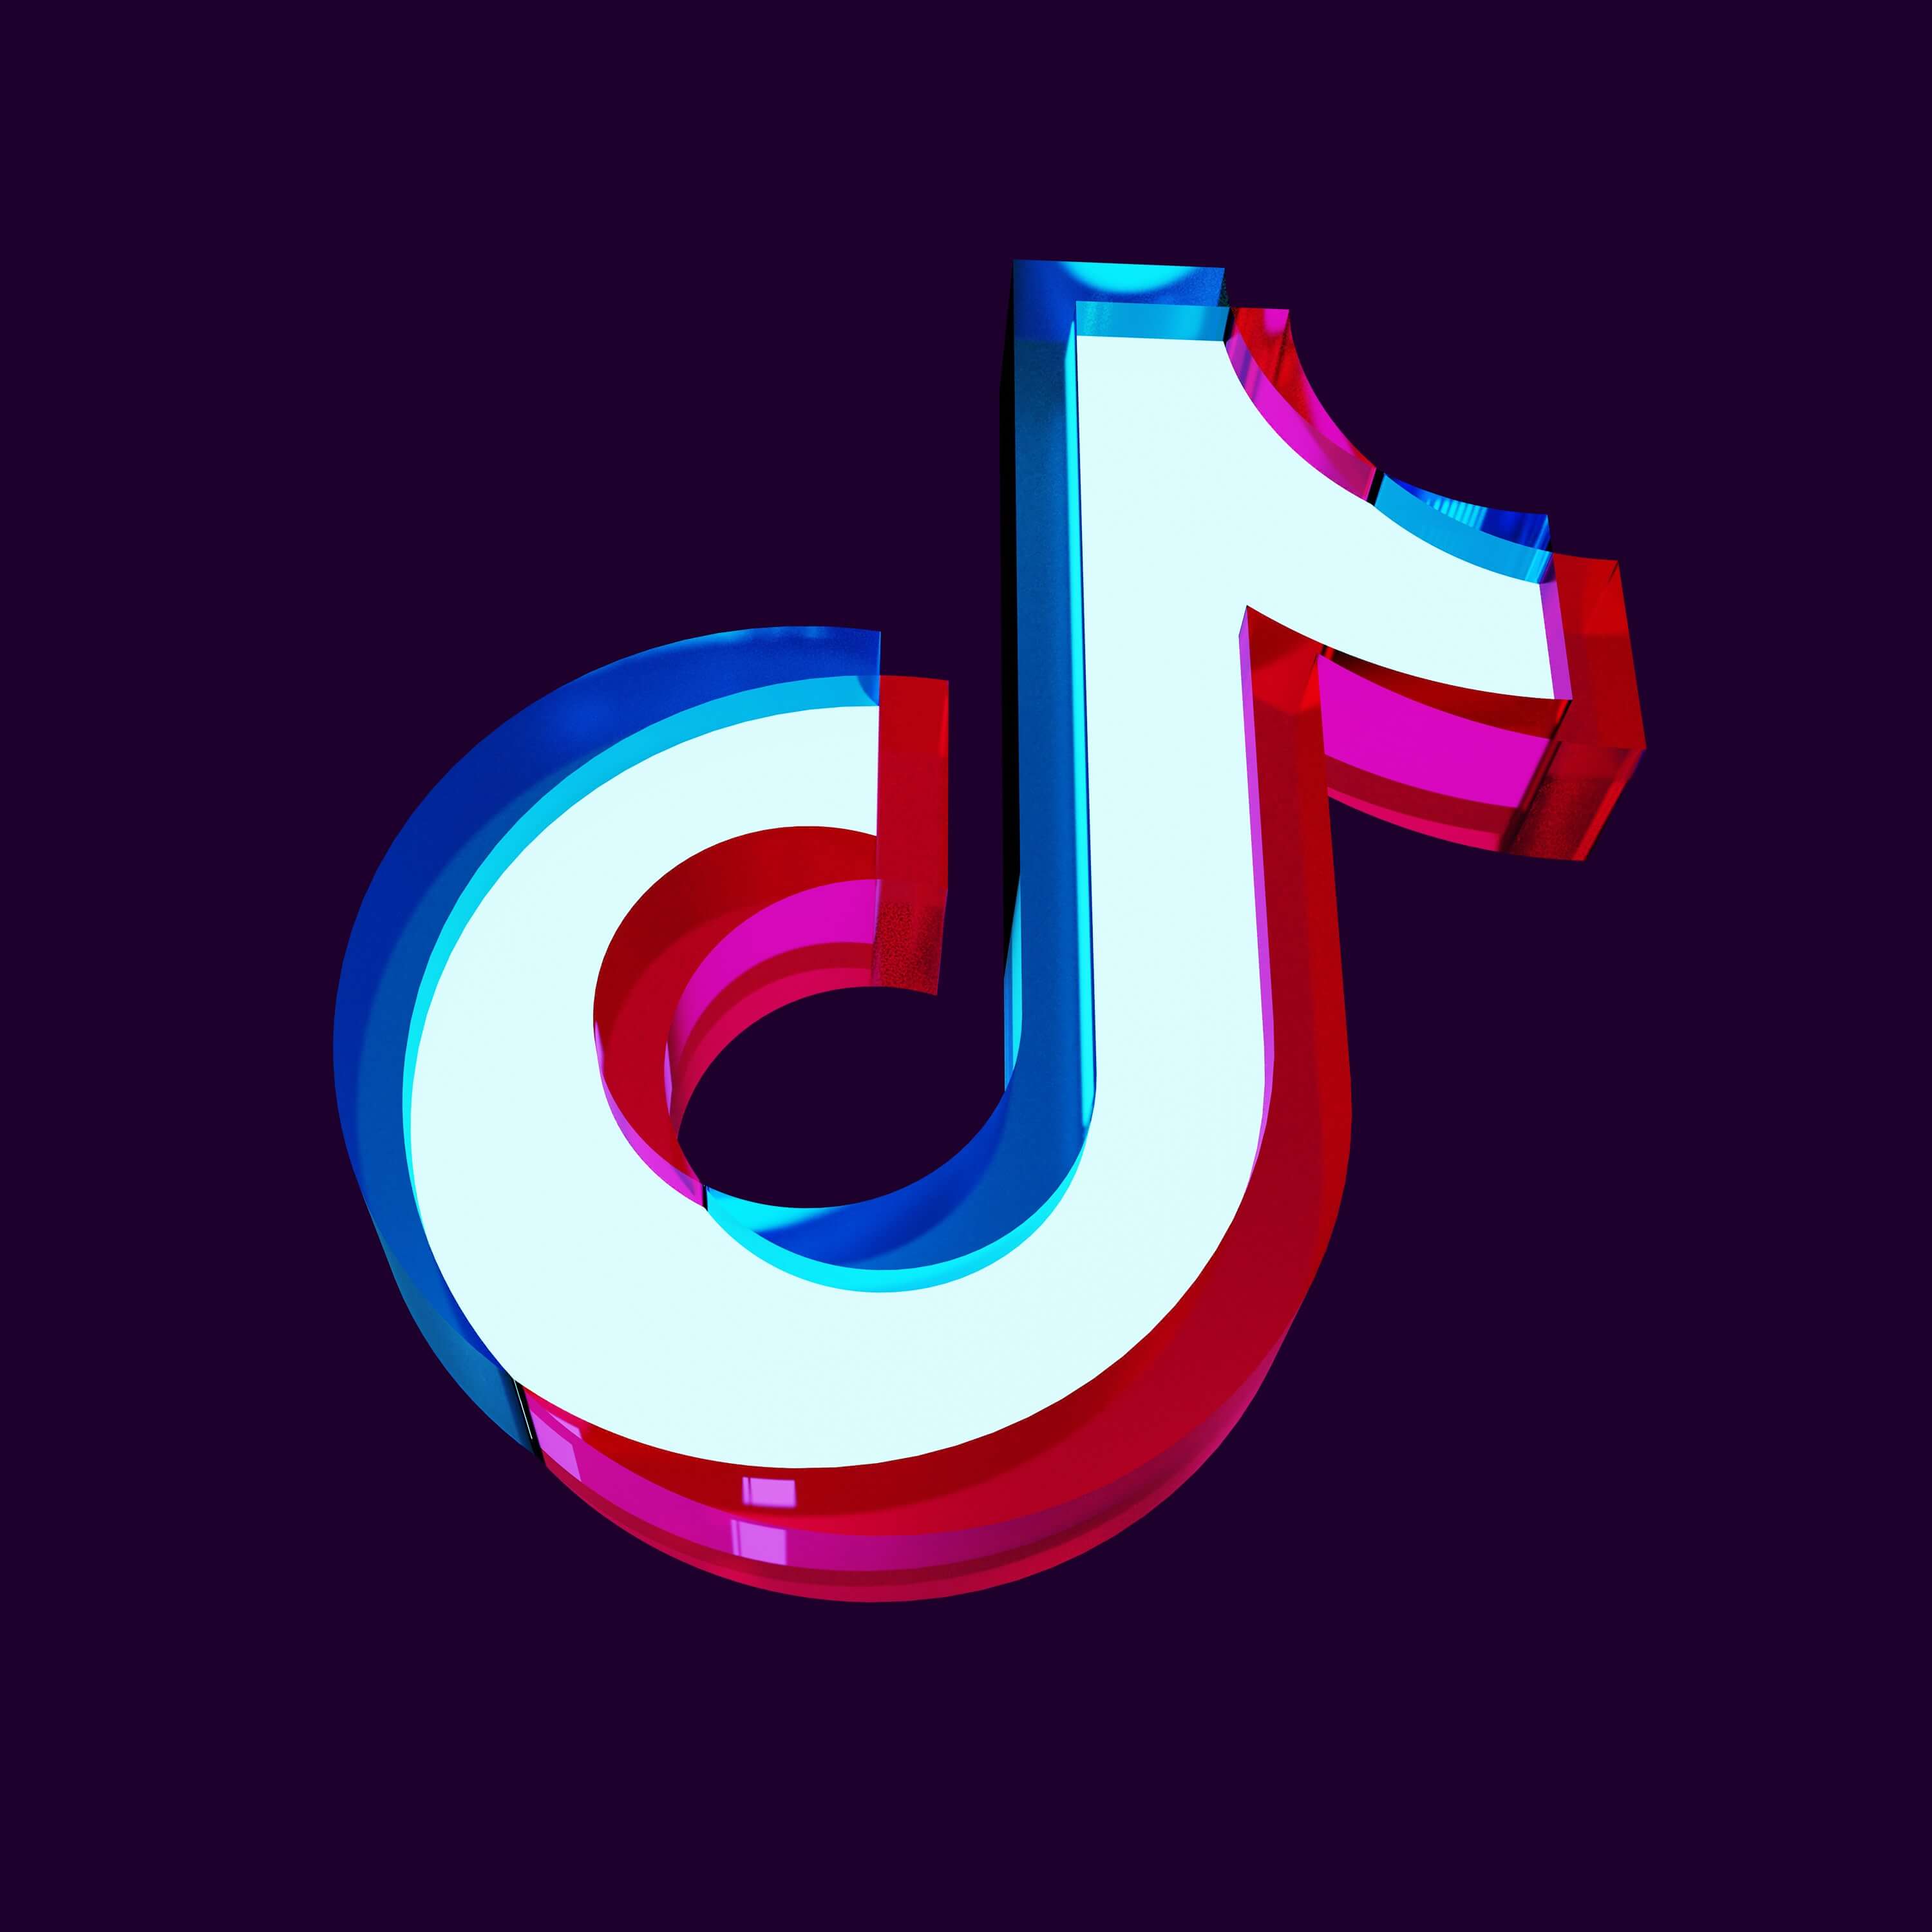 How to get started with TikTok as a brand in 2023?